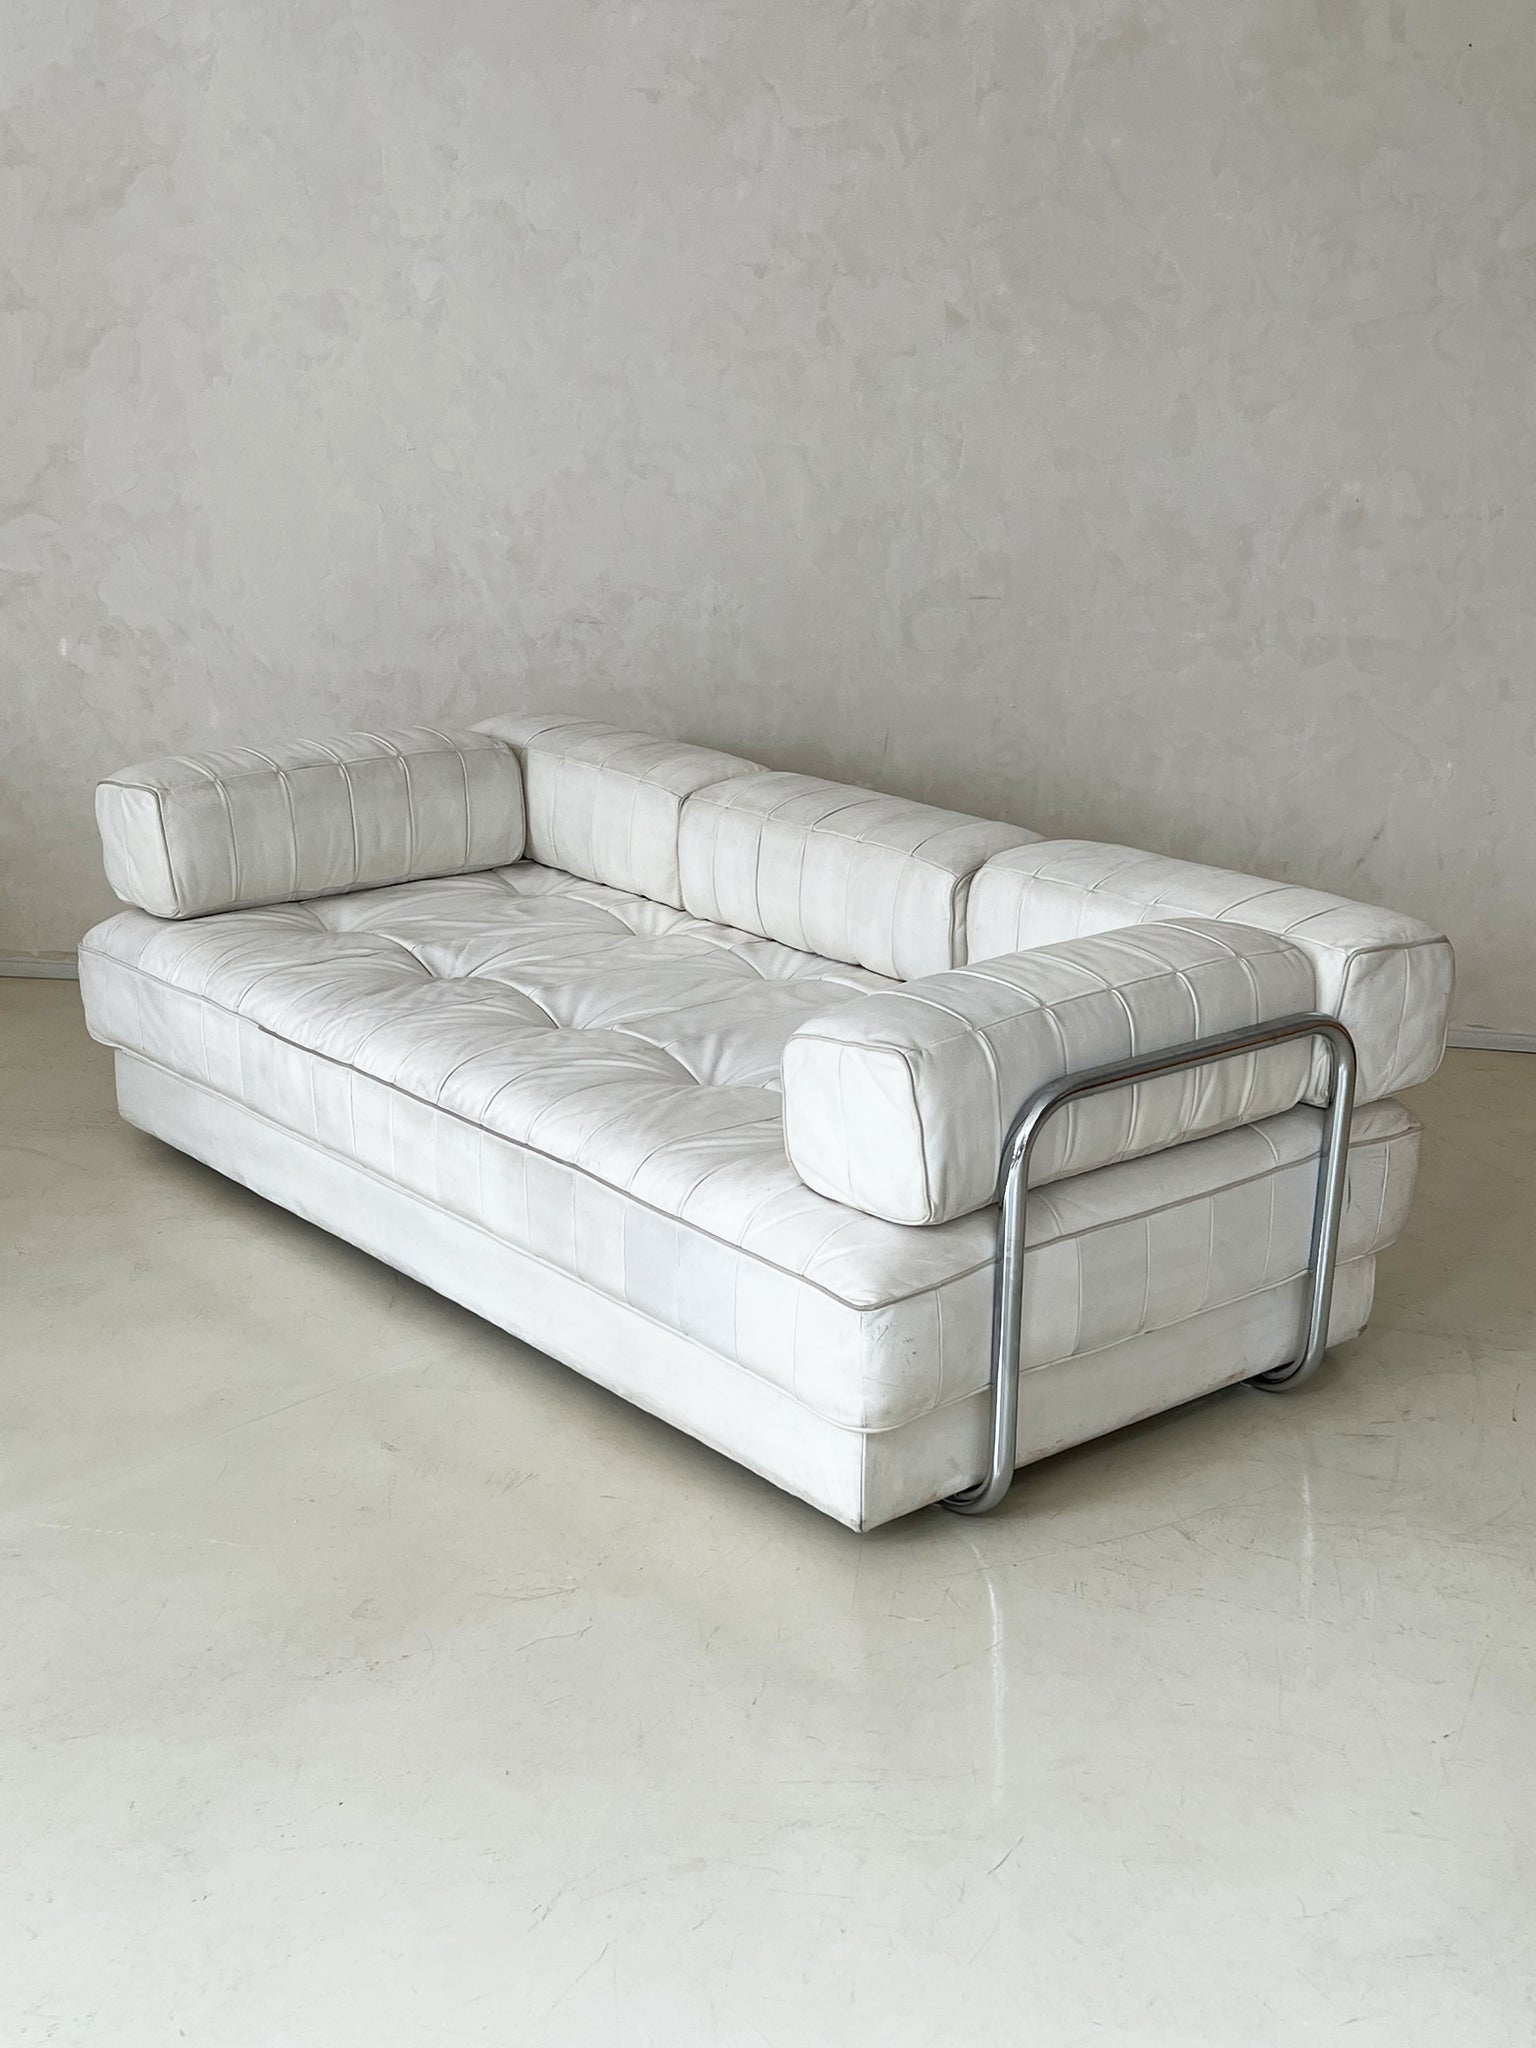 Rare Vintage De Sede White Leather Daybed Sofa Bed